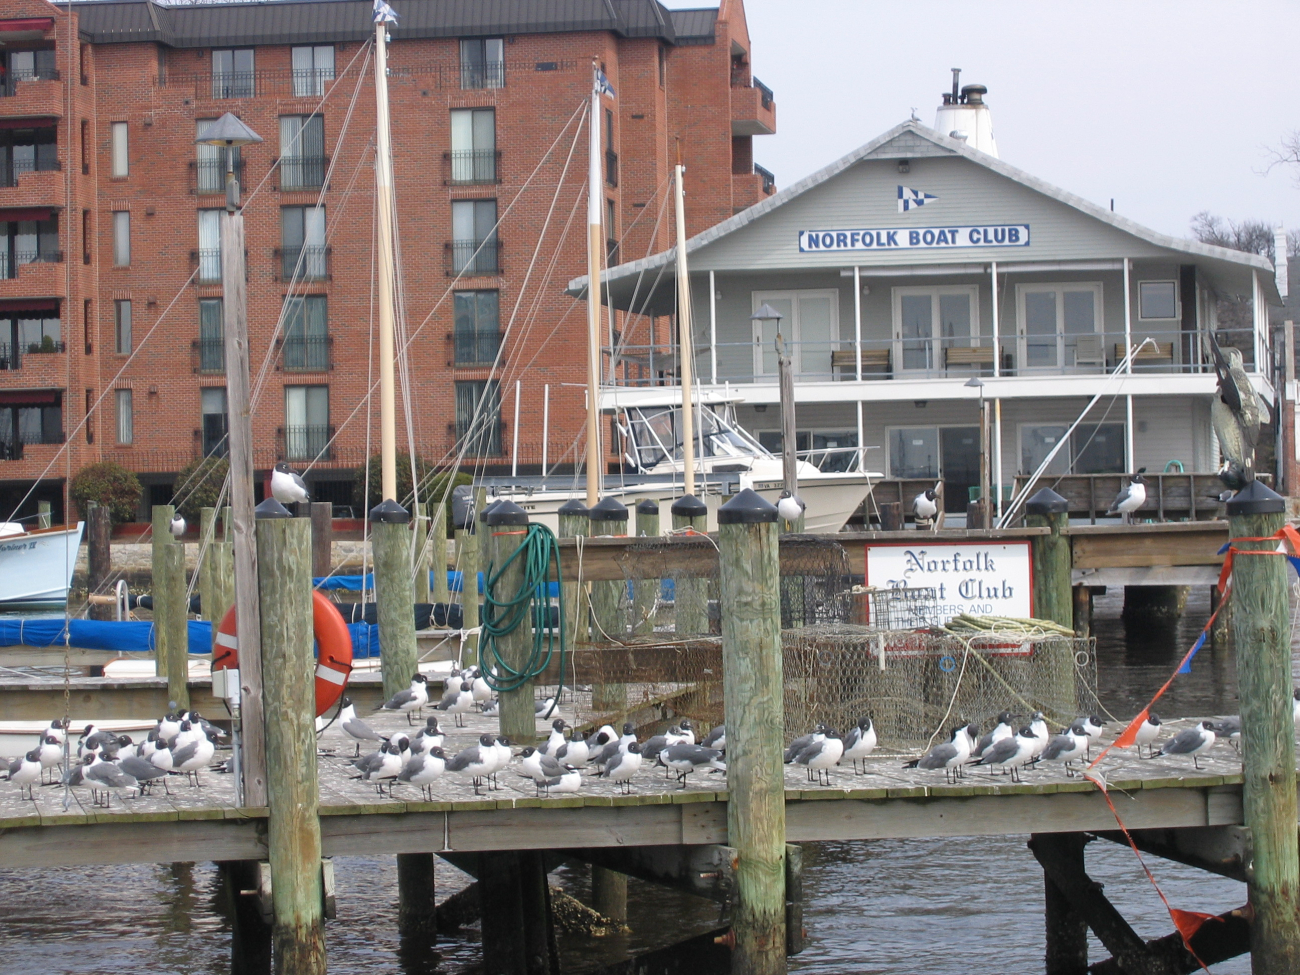 Laughing gulls at the Norfolk Boat Club